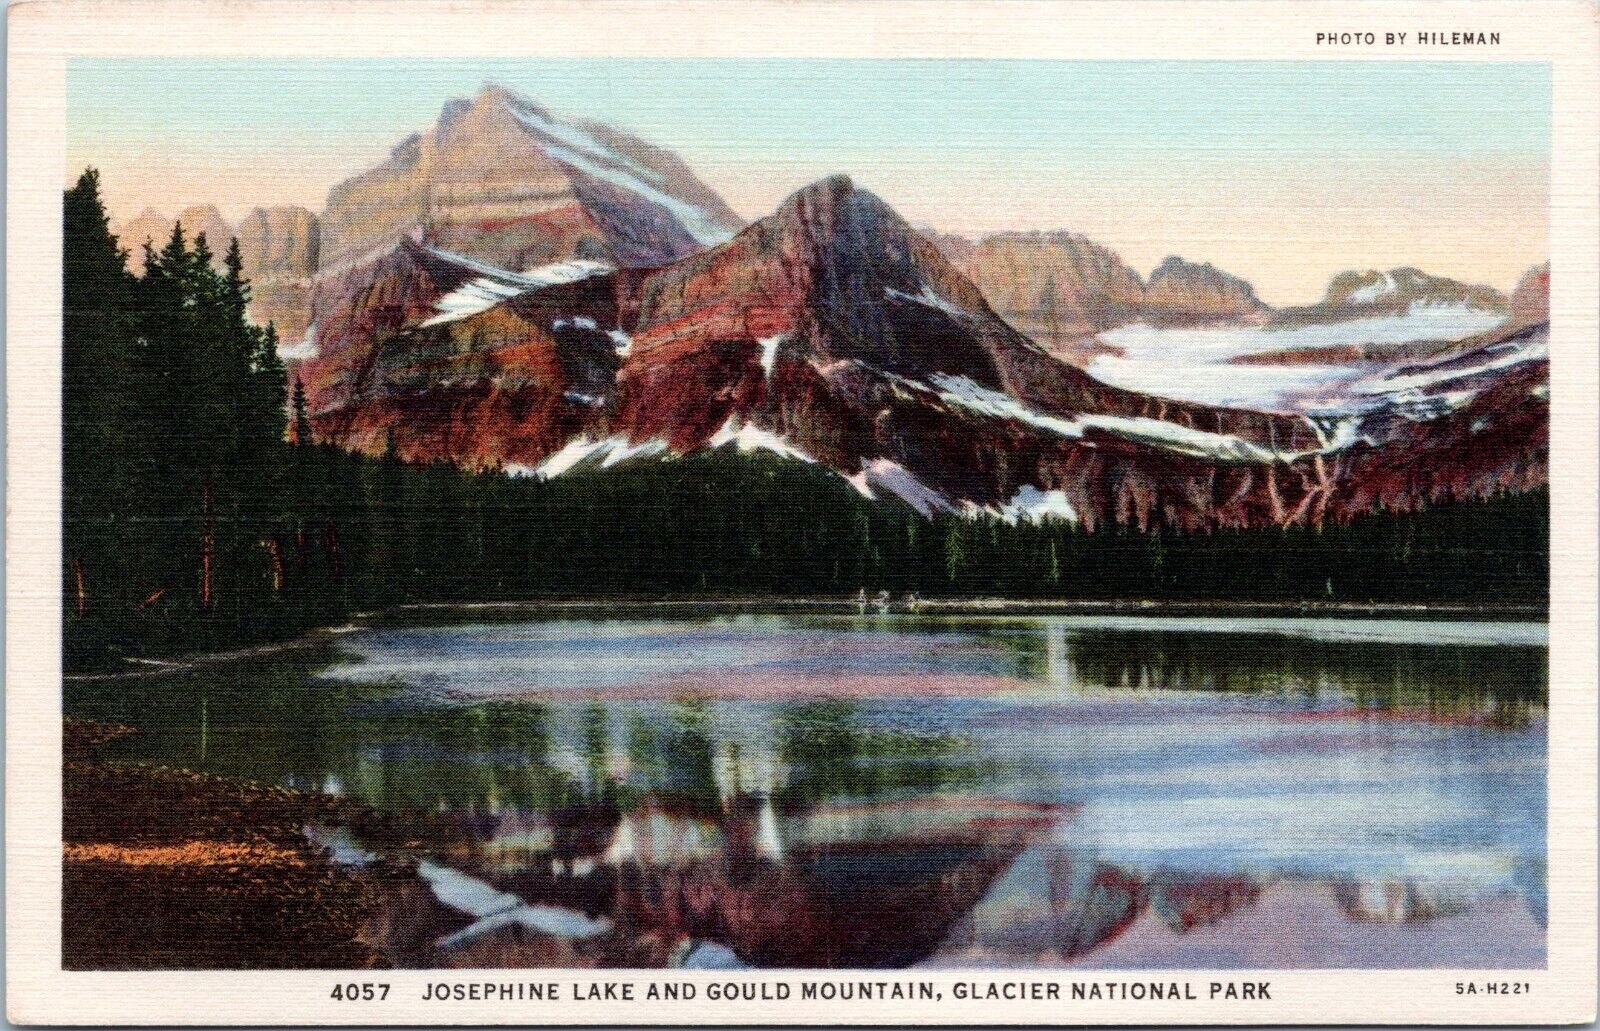 St Mary Lake from Going to Sun Chalets, Glacier NP Montana - 1935 Linen Postcard